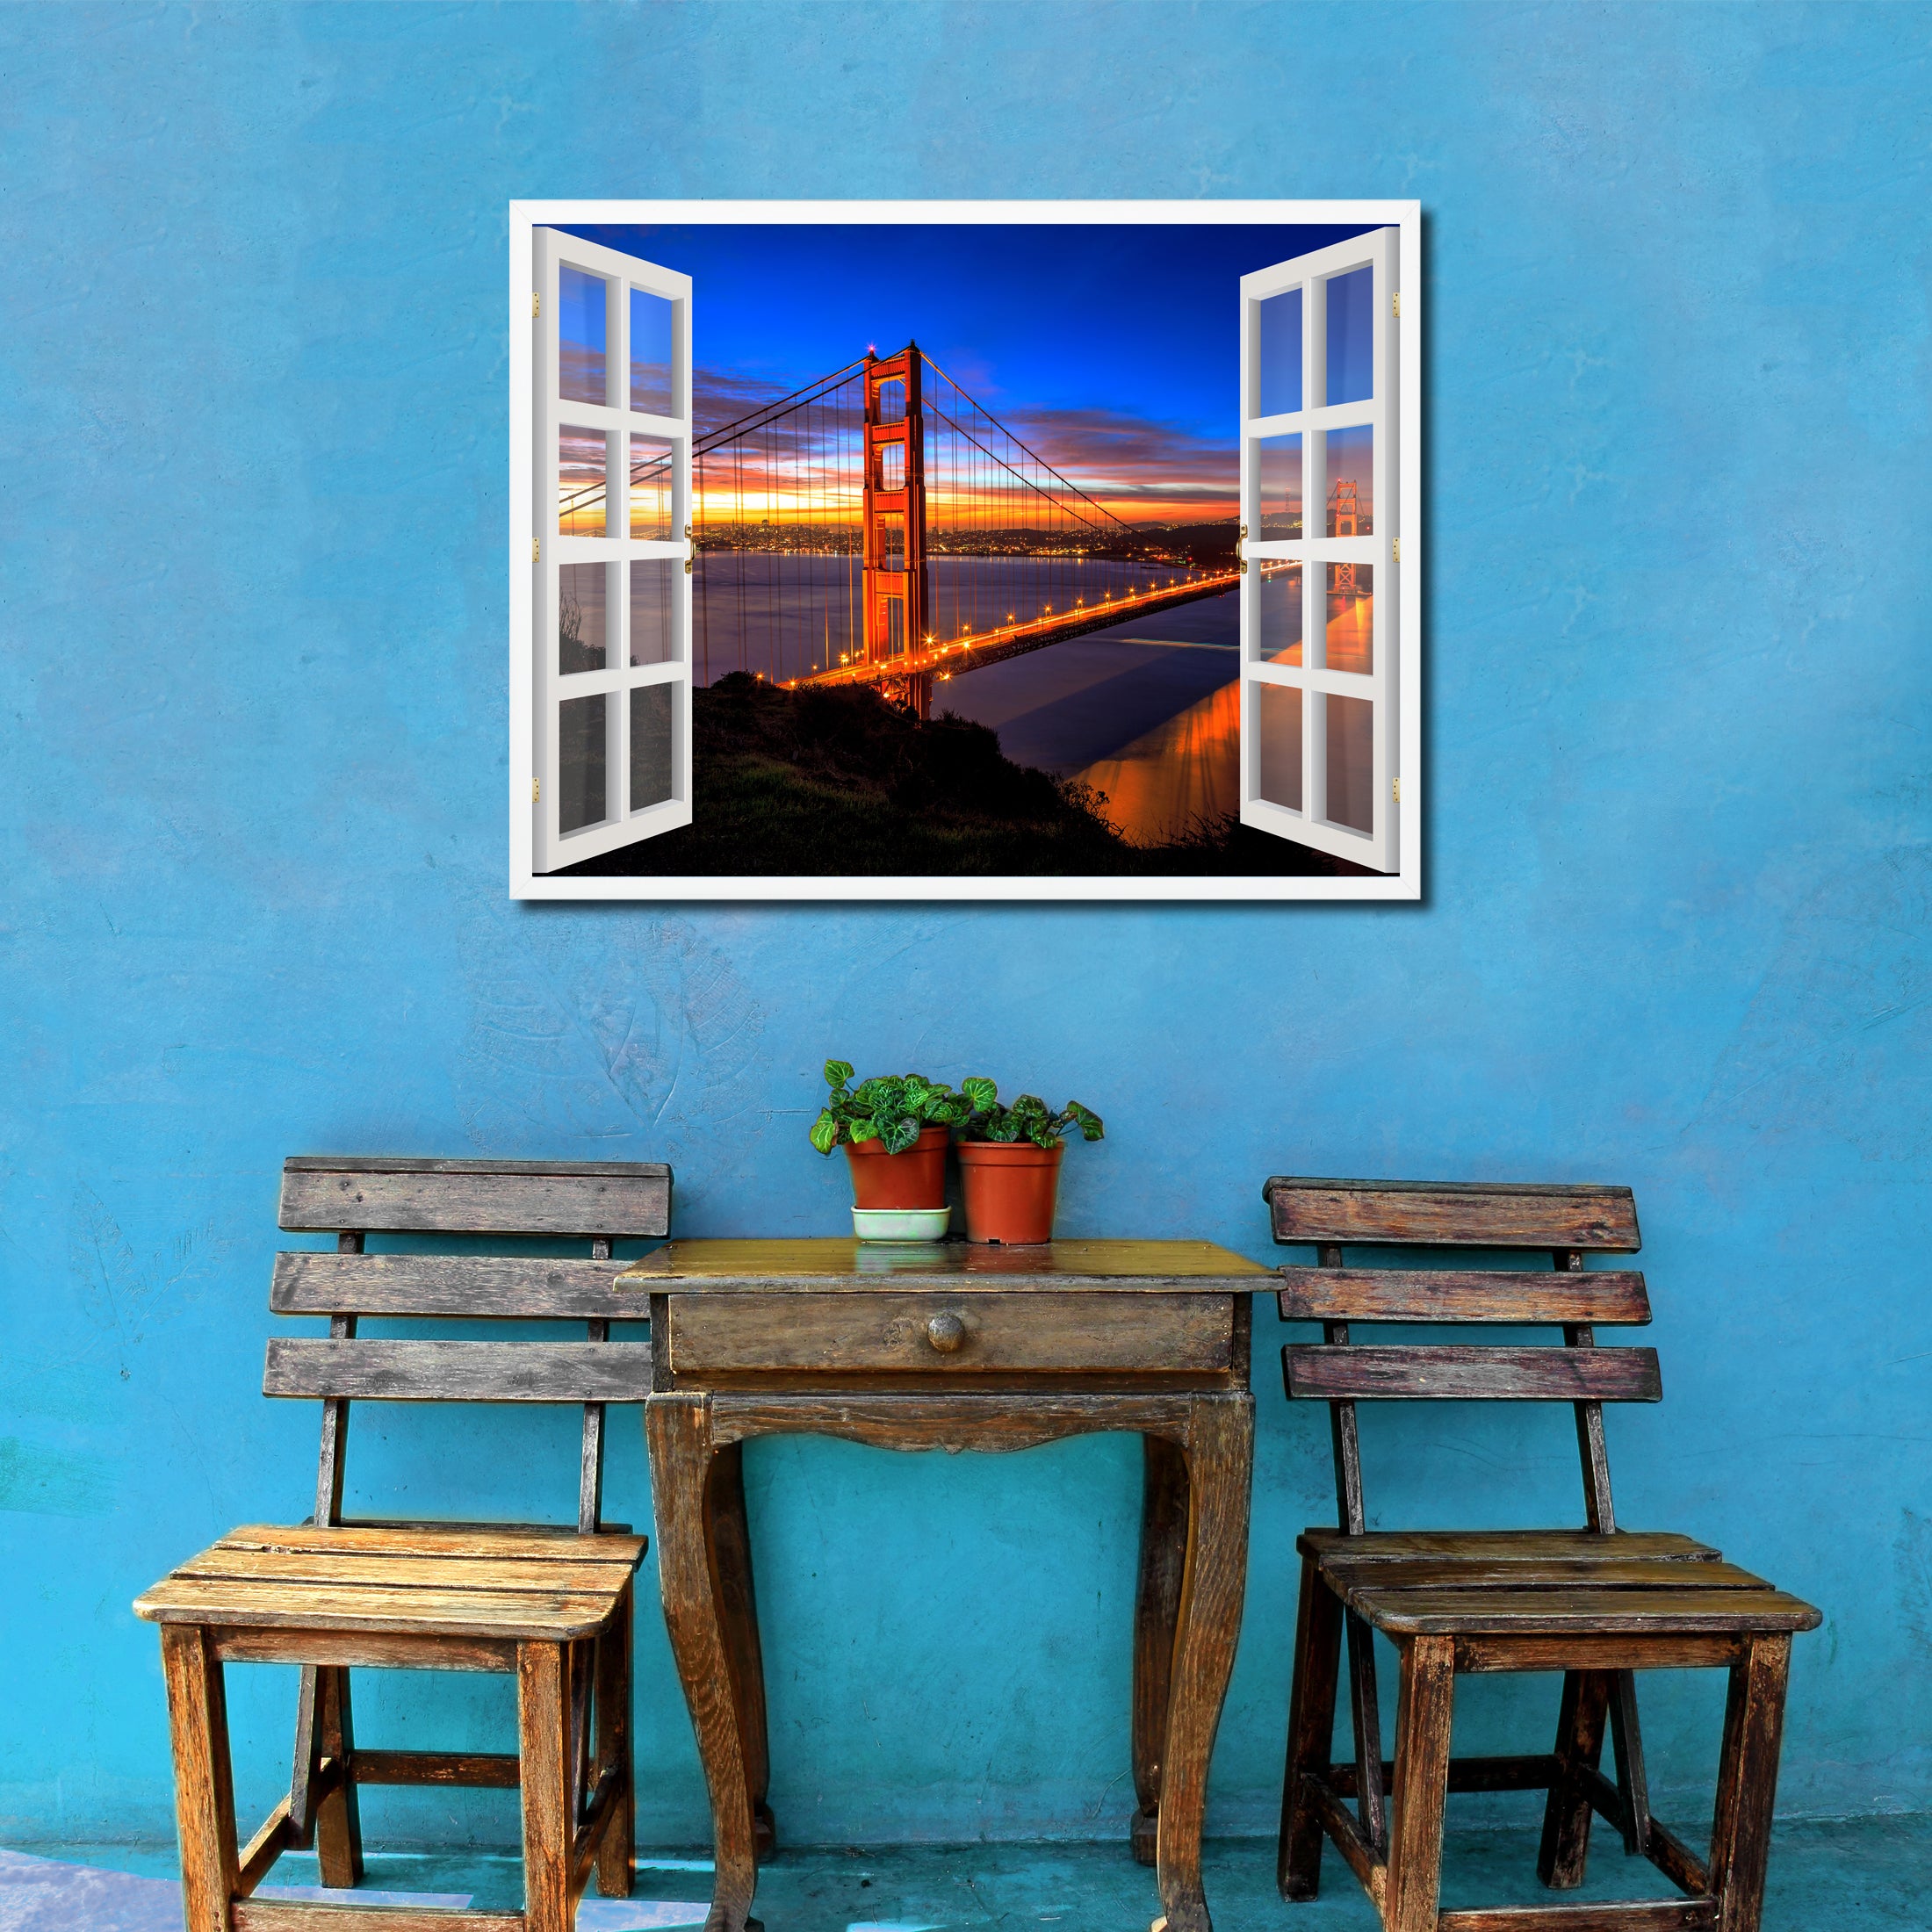 Golden Gate Bridge San Francisco California Sunset Picture French Window Framed Canvas Print Home Decor Wall Art Collection